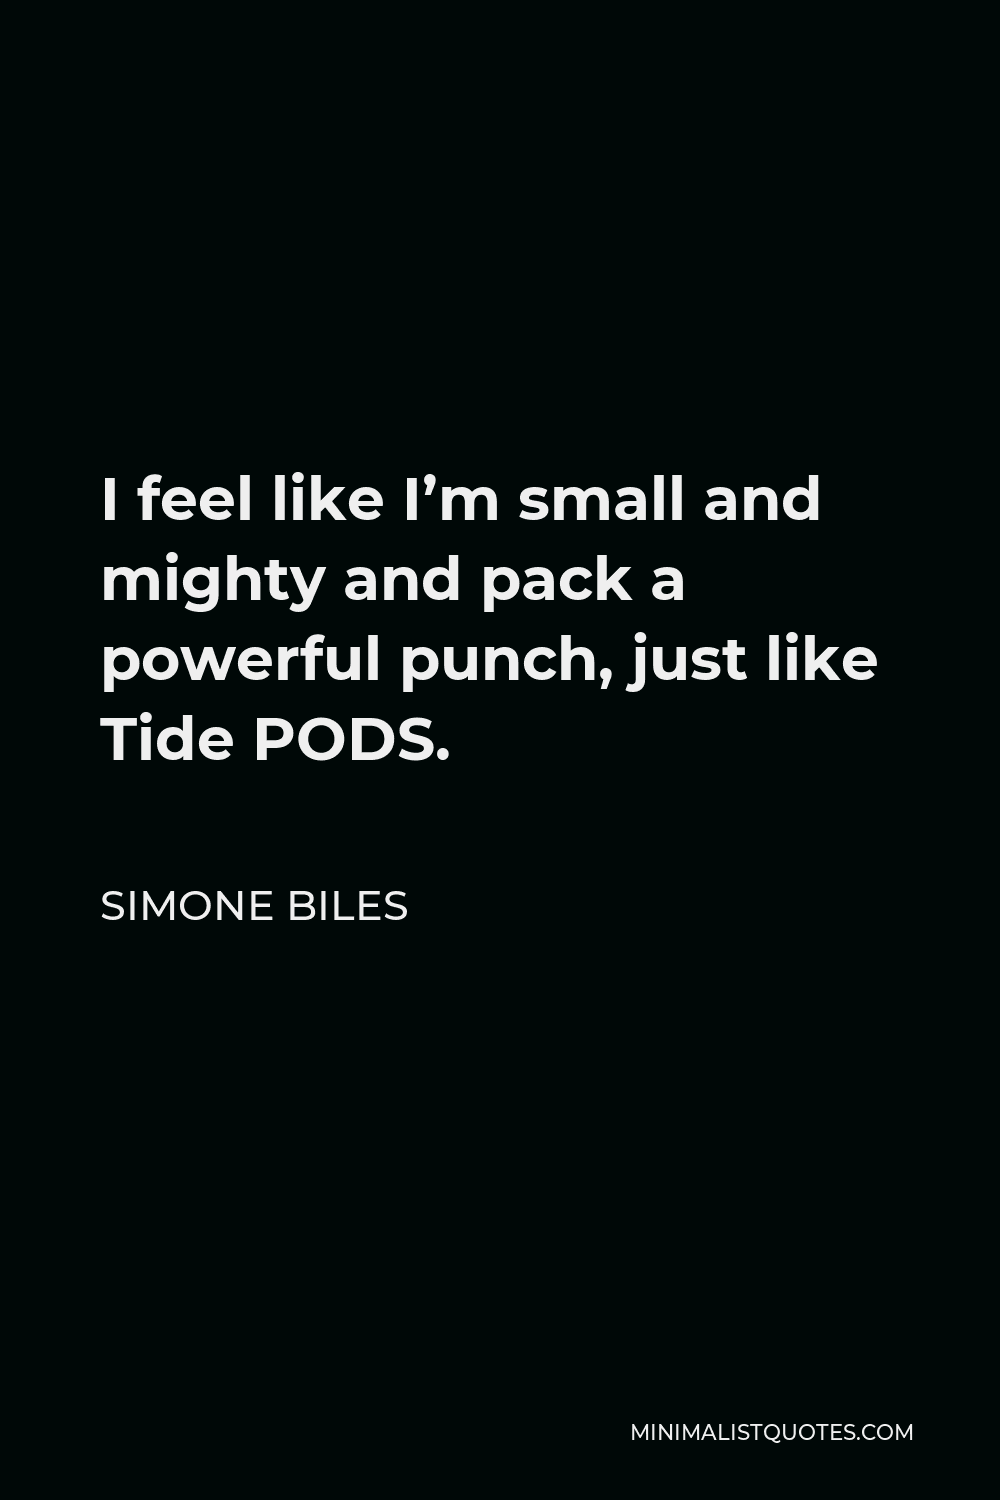 Simone Biles Quote - I feel like I’m small and mighty and pack a powerful punch, just like Tide PODS.